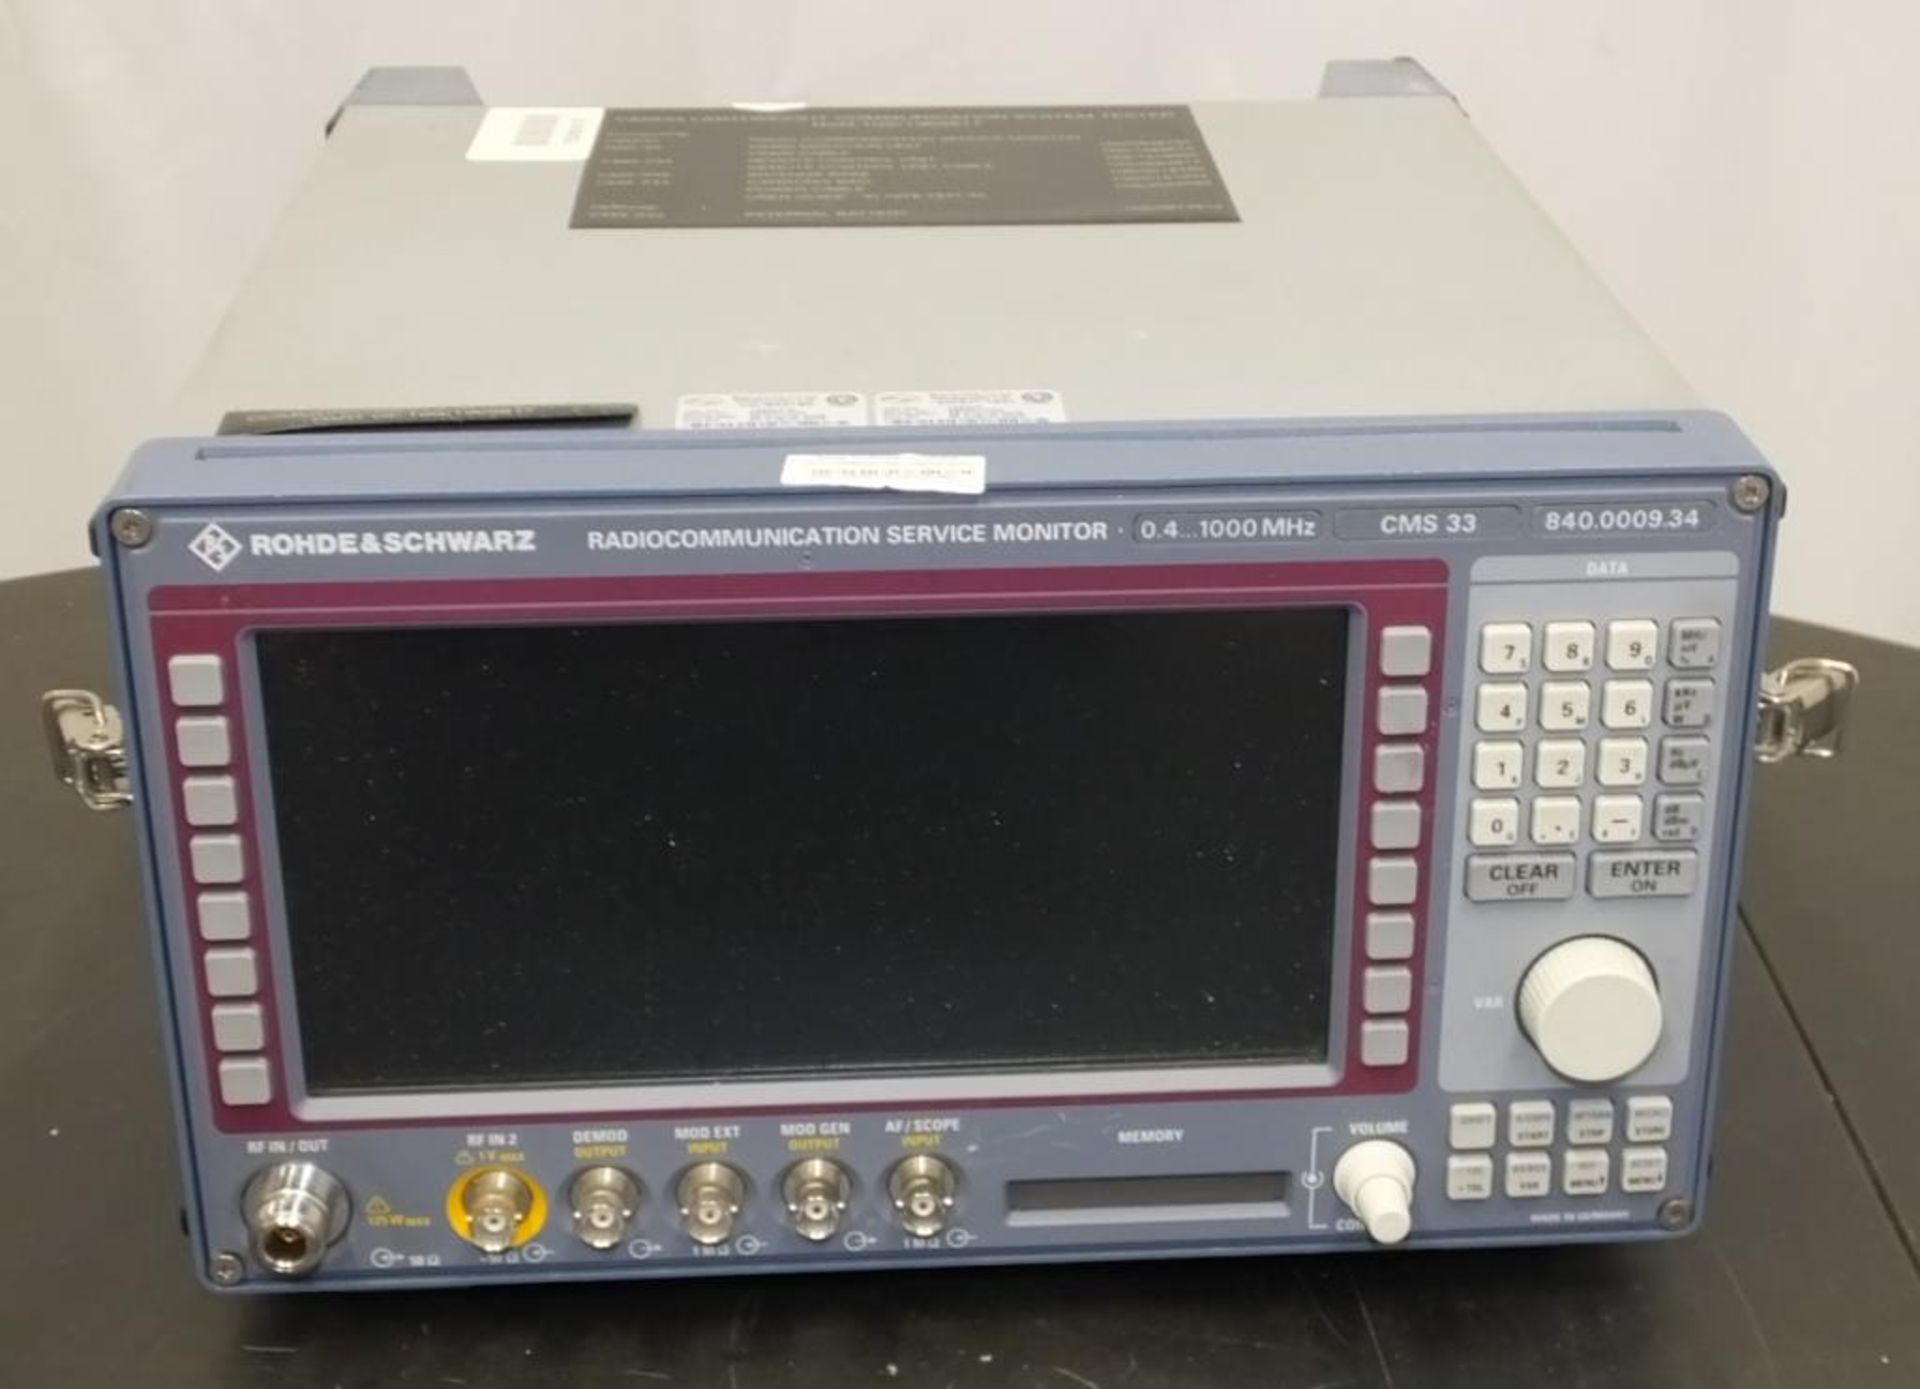 Rohde & Schwarz Radio Communications monitor 0.4 - 1000mhz - CMS33 - 840.0009.34, antenna base in co - Image 2 of 17